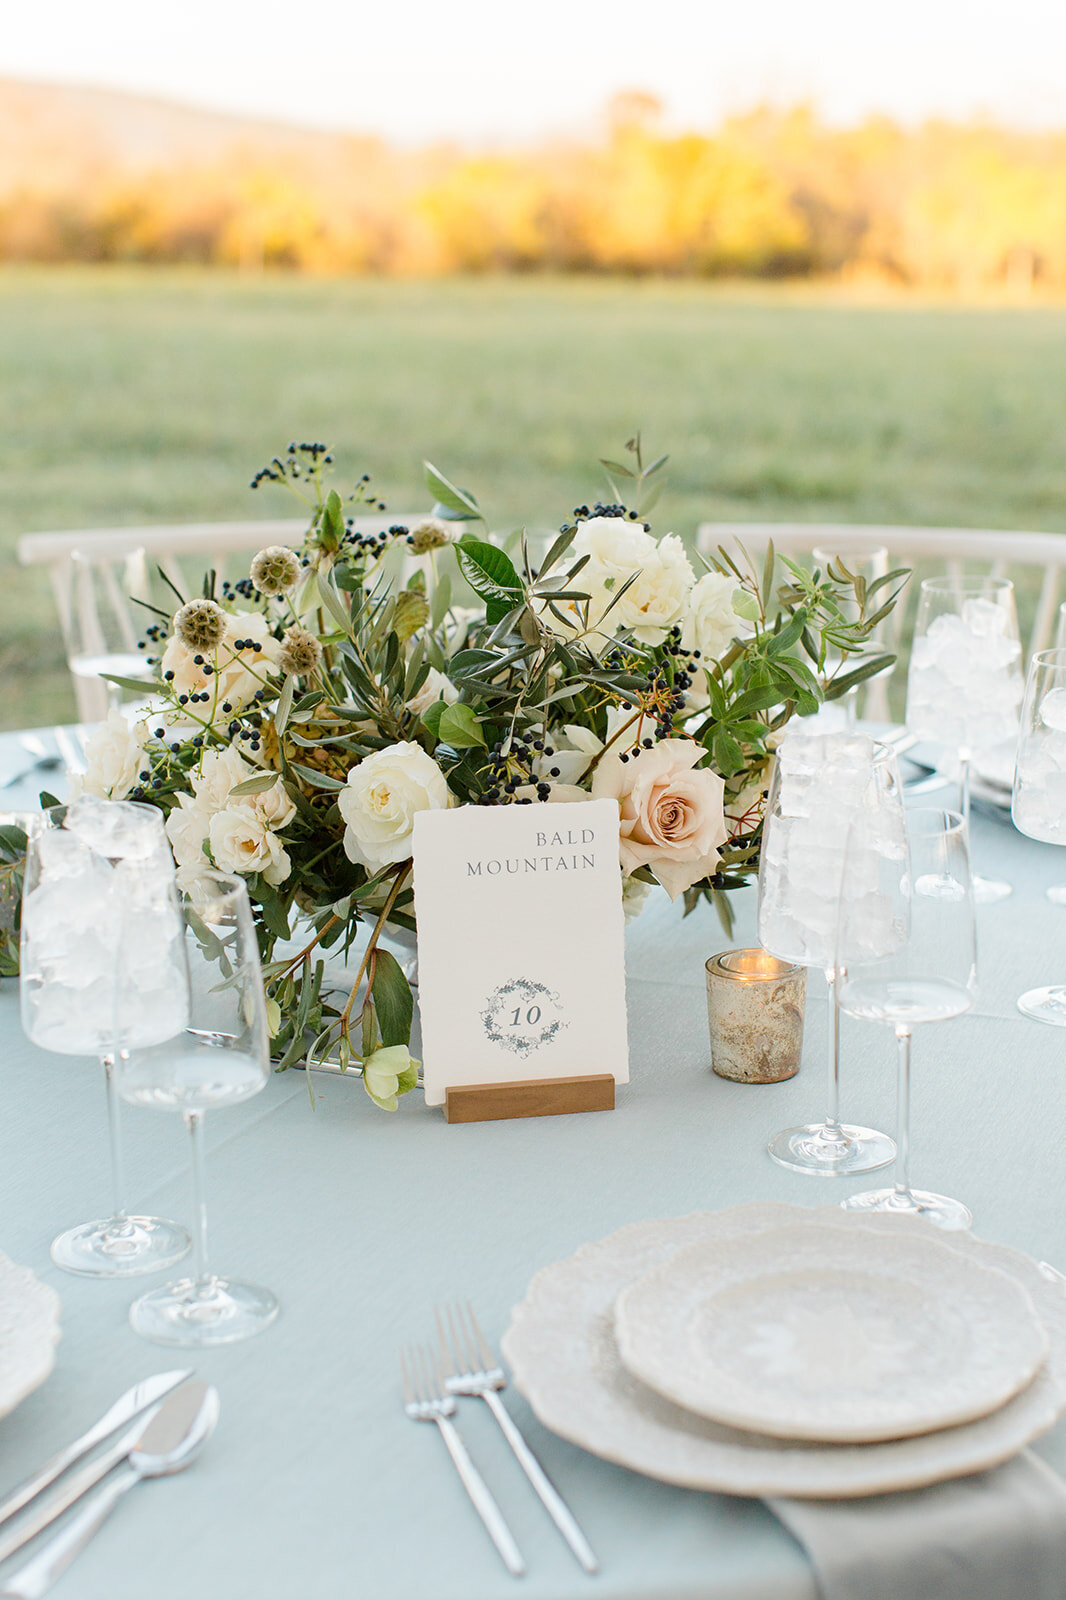 Wedding reception table with floral centerpiece and custom table number calligraphy